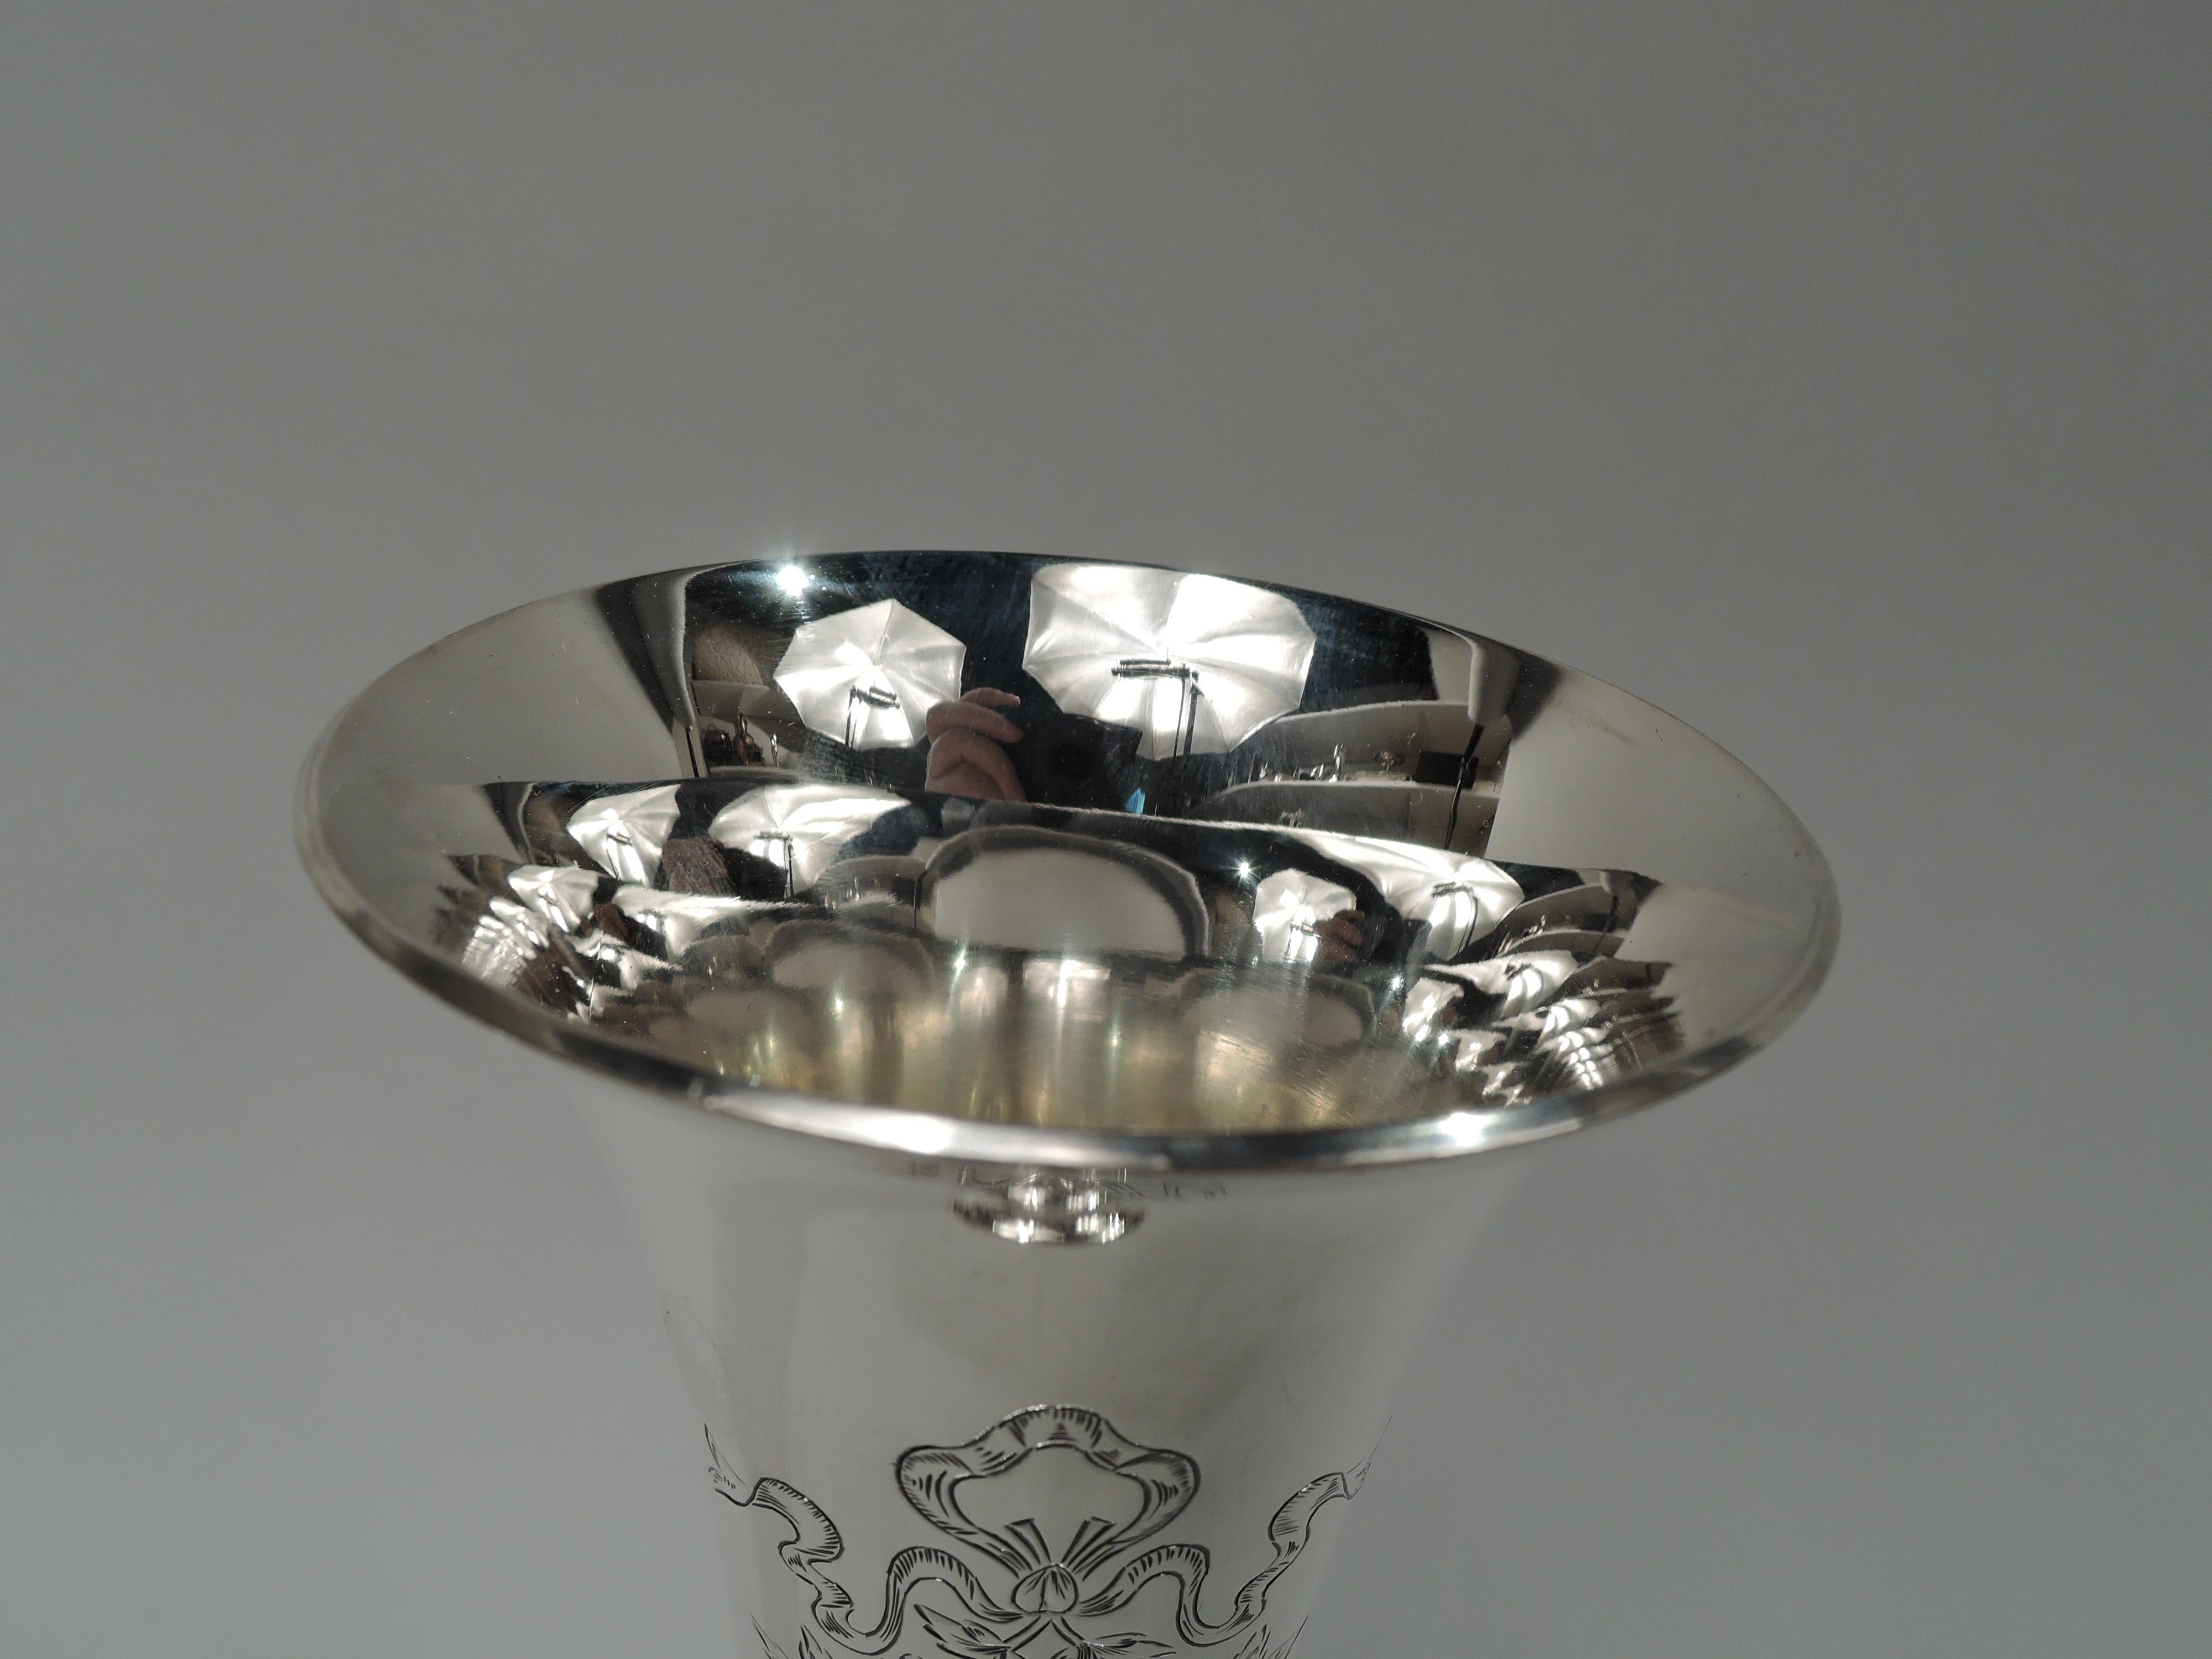 Edwardian sterling silver trumpet vase. Made by Unger Bros in Newark, circa 1910. Conical with flared rim and domed foot. Engraved ribboned wreath with pendant flowers (vacant). Fully marked including maker’s stamp and no. 09792. Weight: 7.3 troy